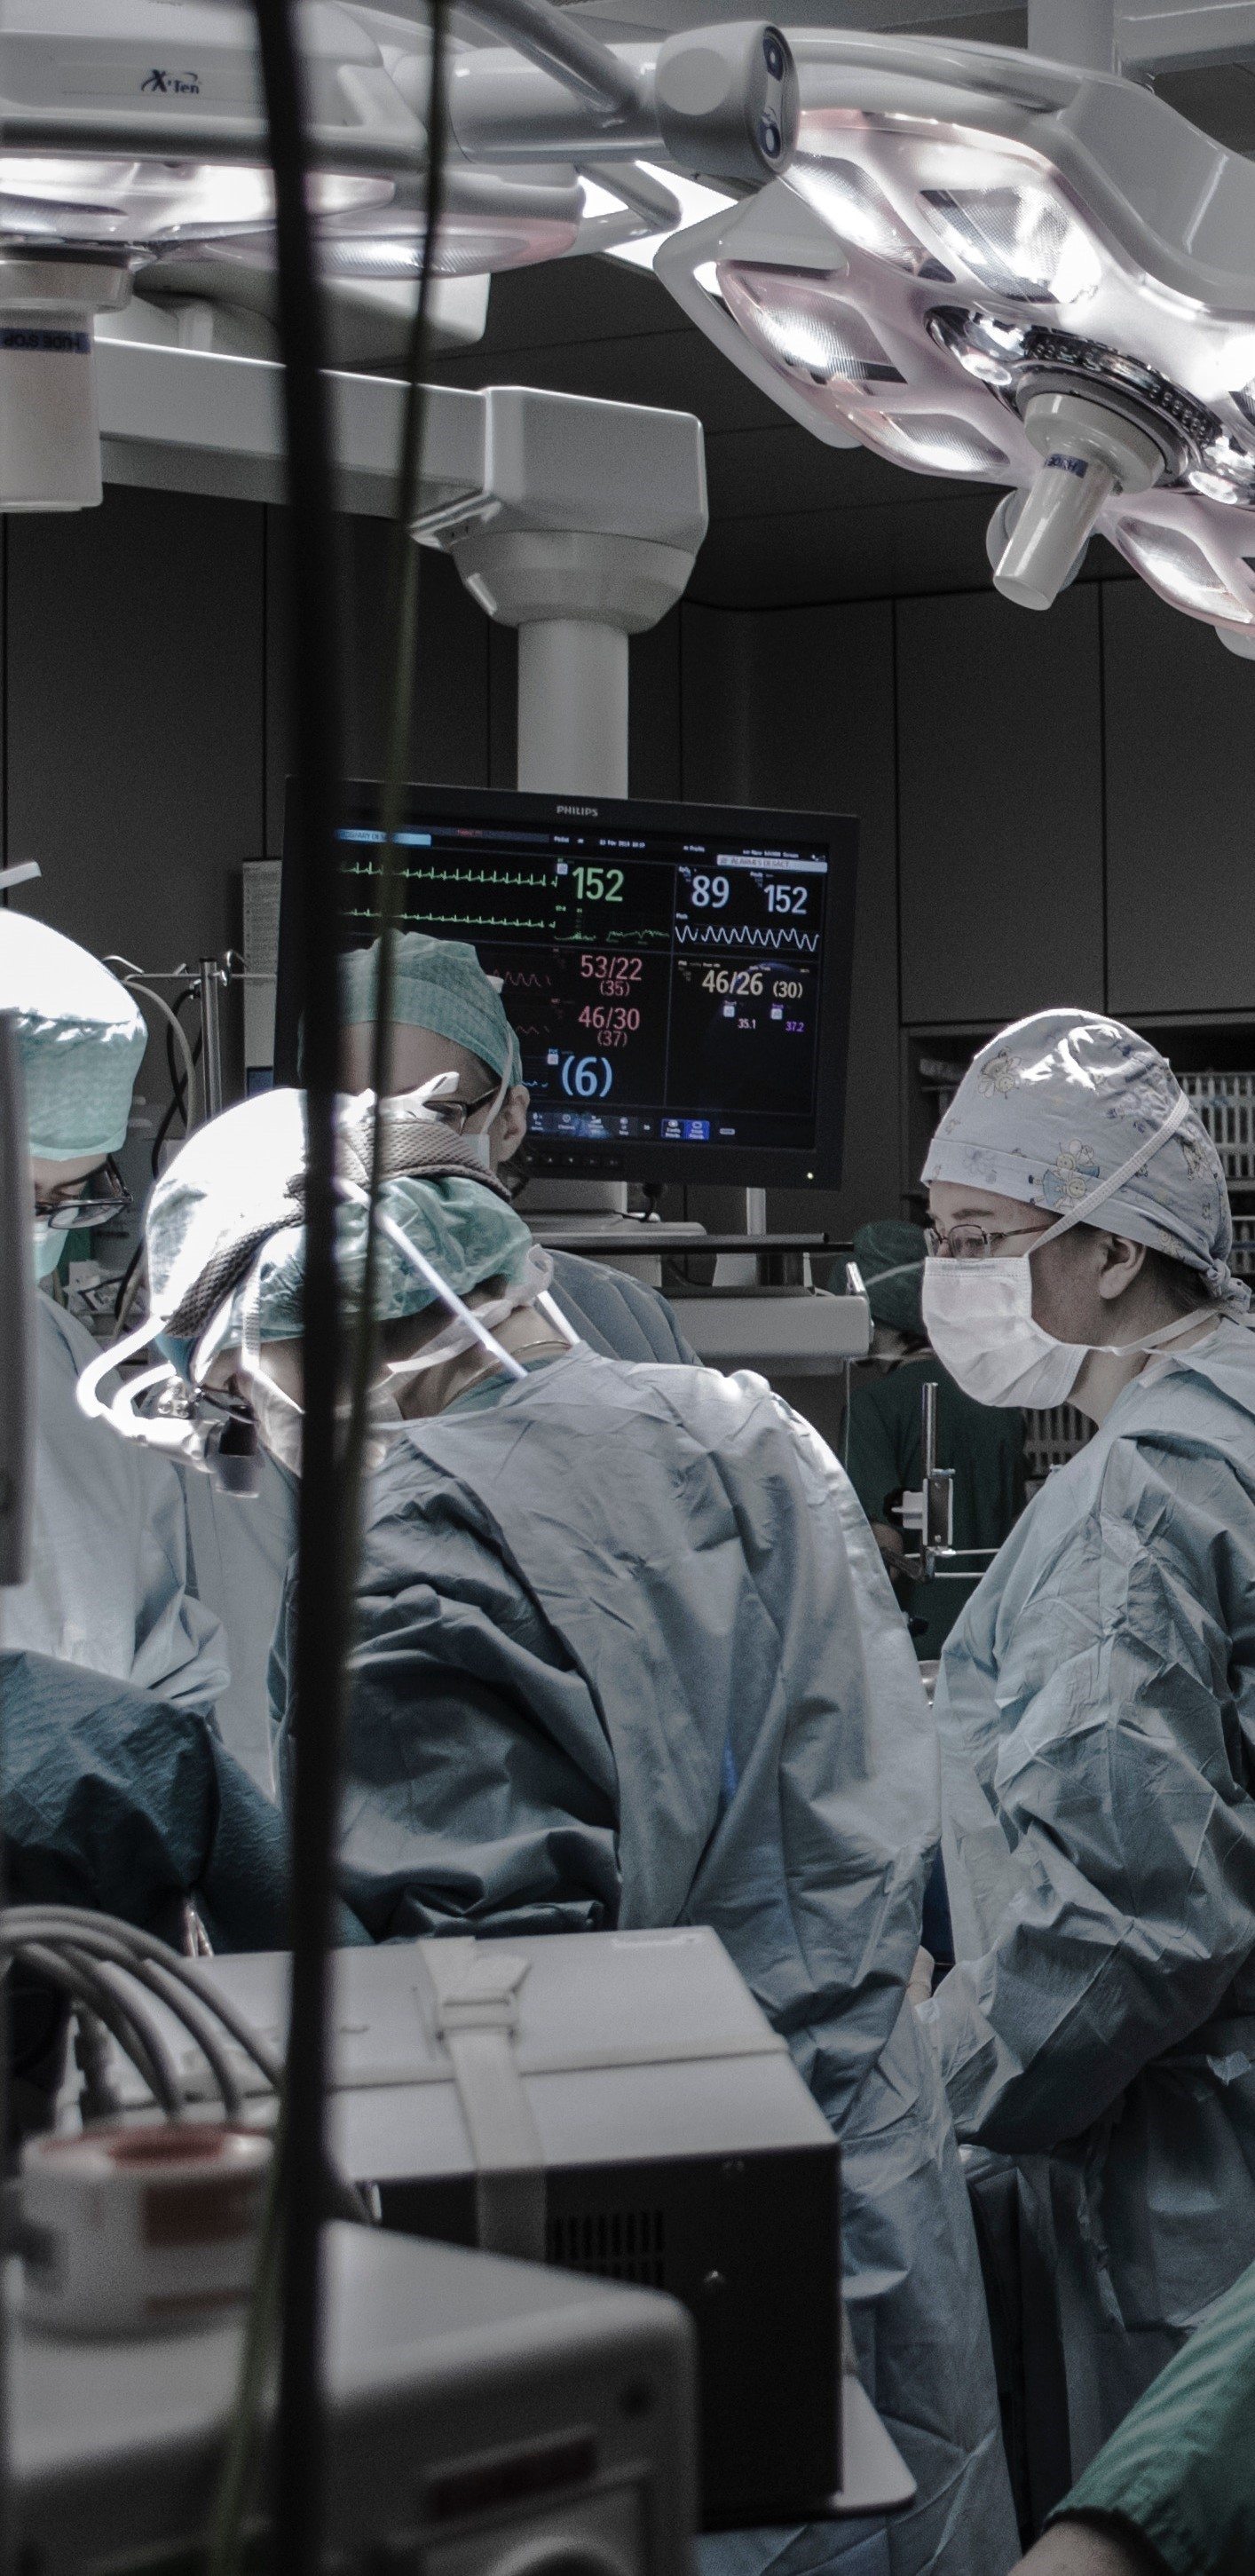 A surgeon's operating room